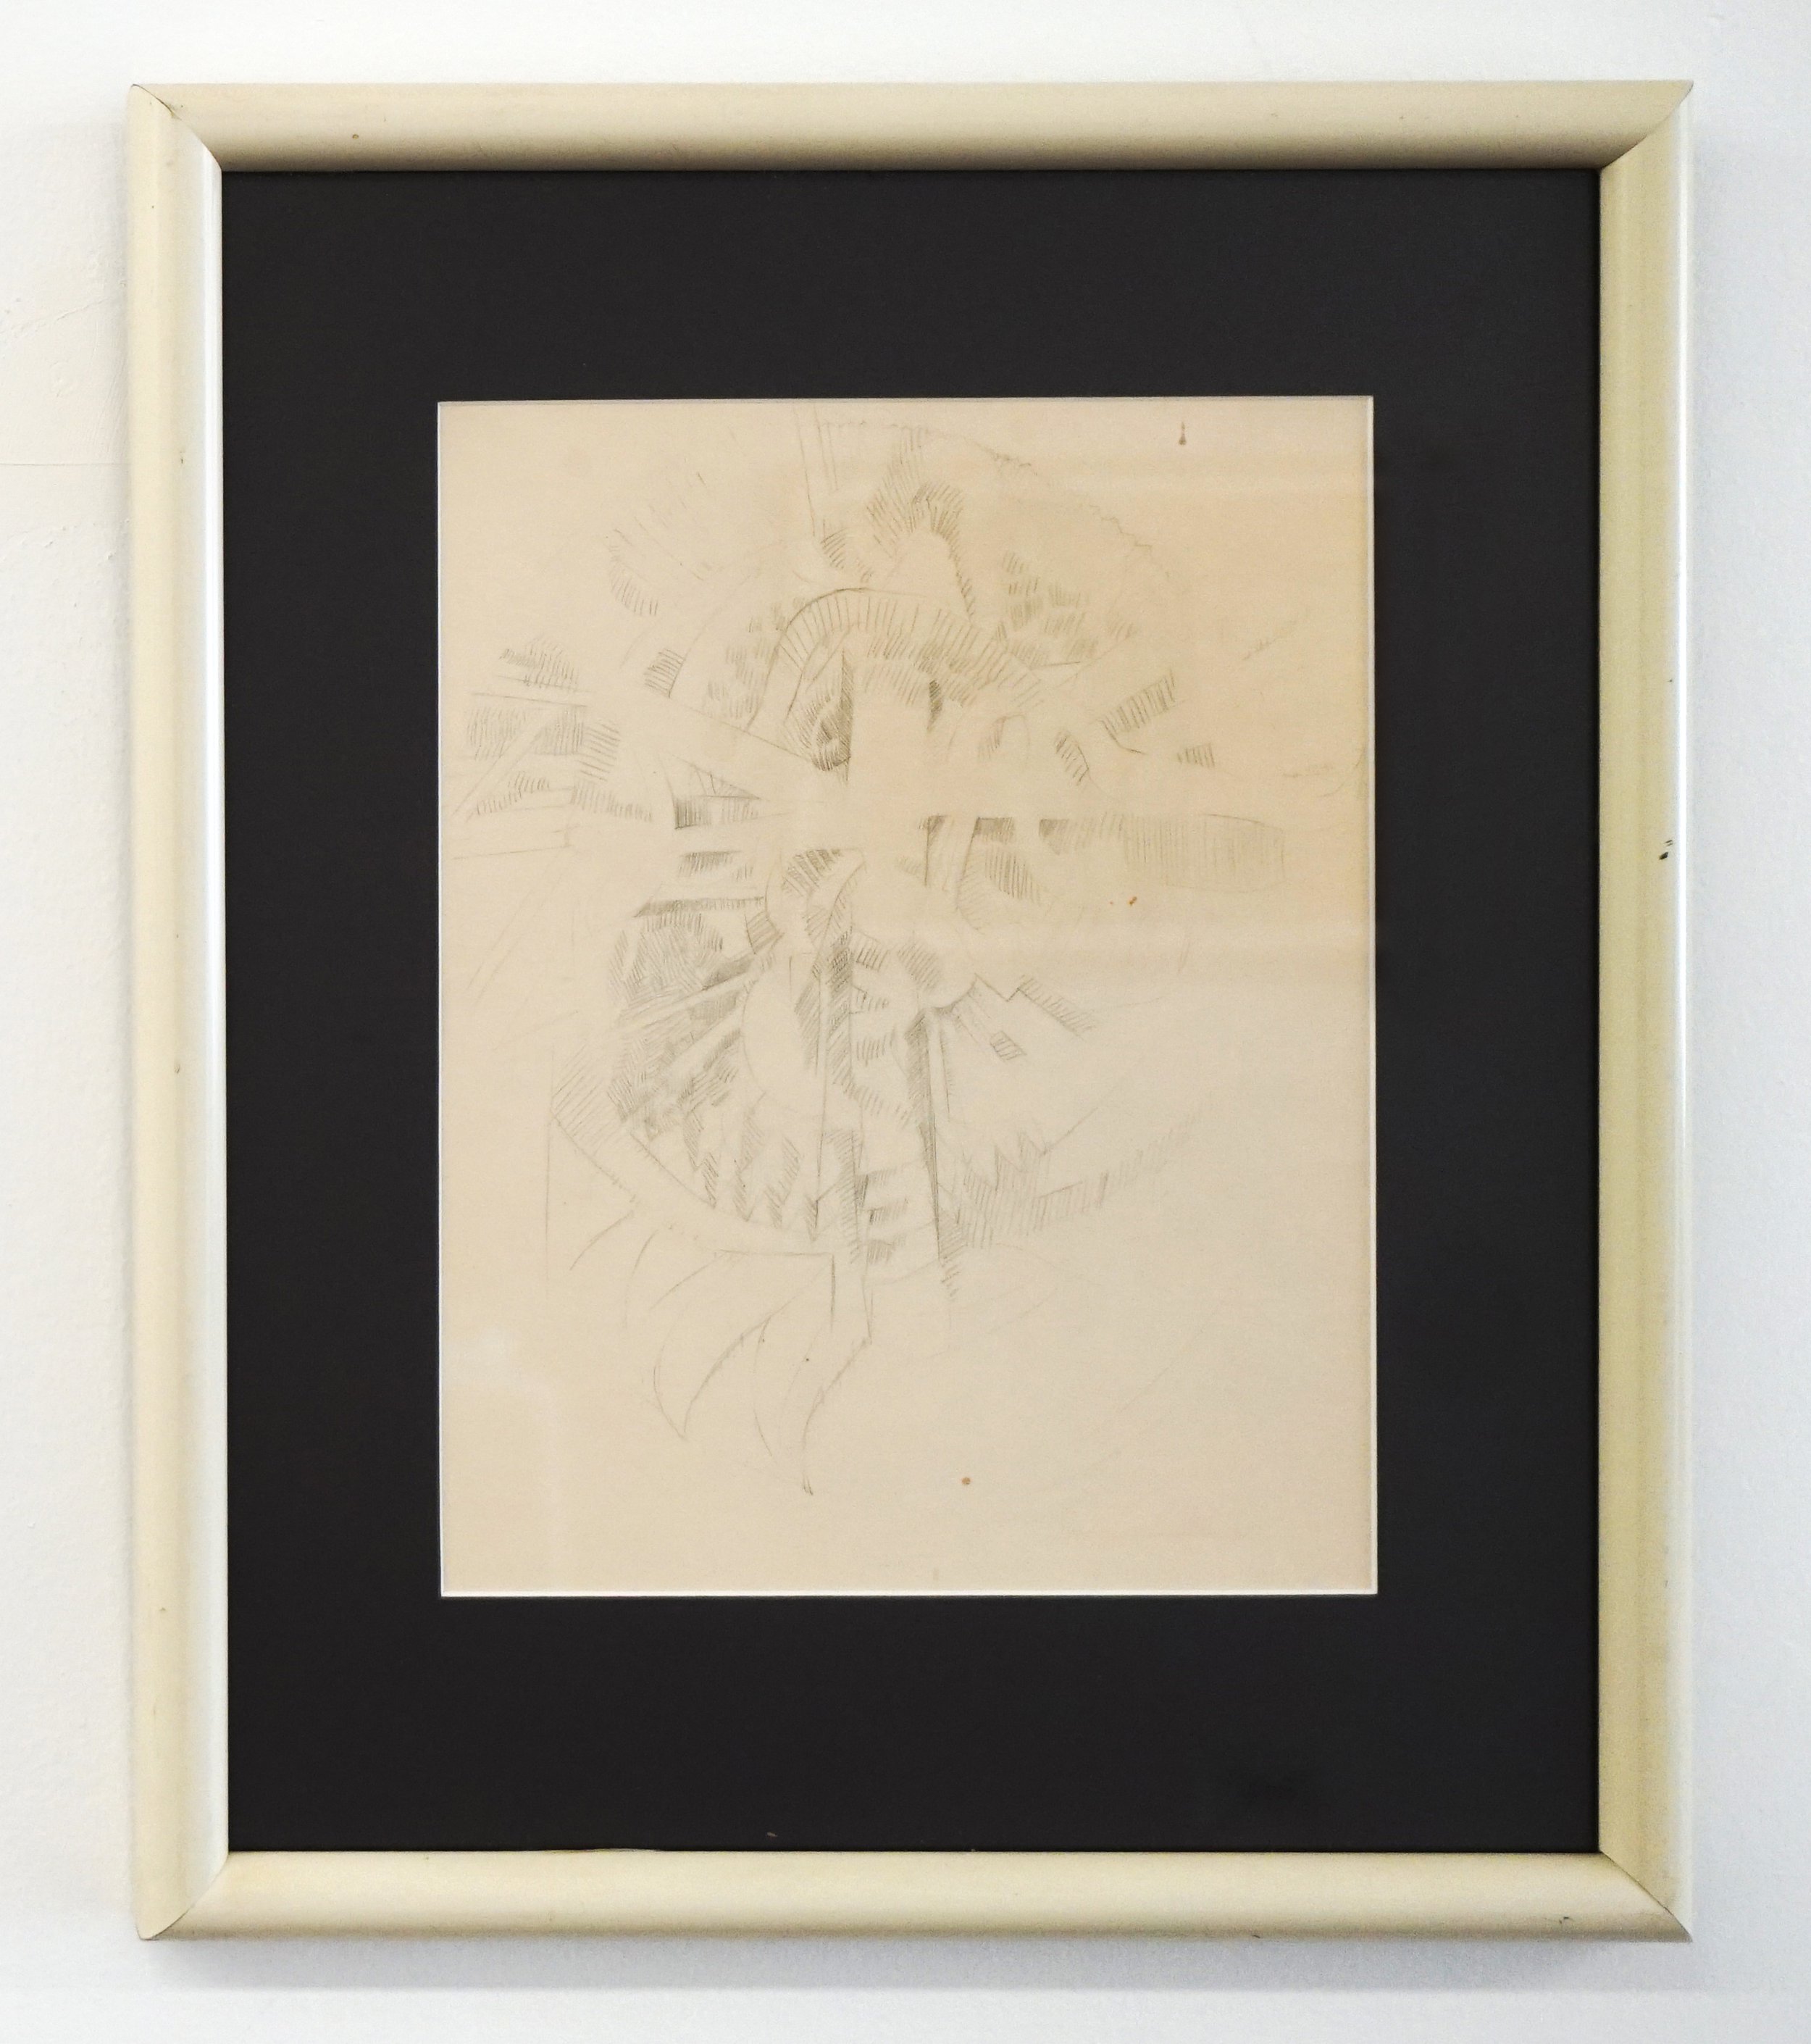  Bruce Conner  Cross , c. 1960 Graphite on paper 11.75 x 9.75 inches 